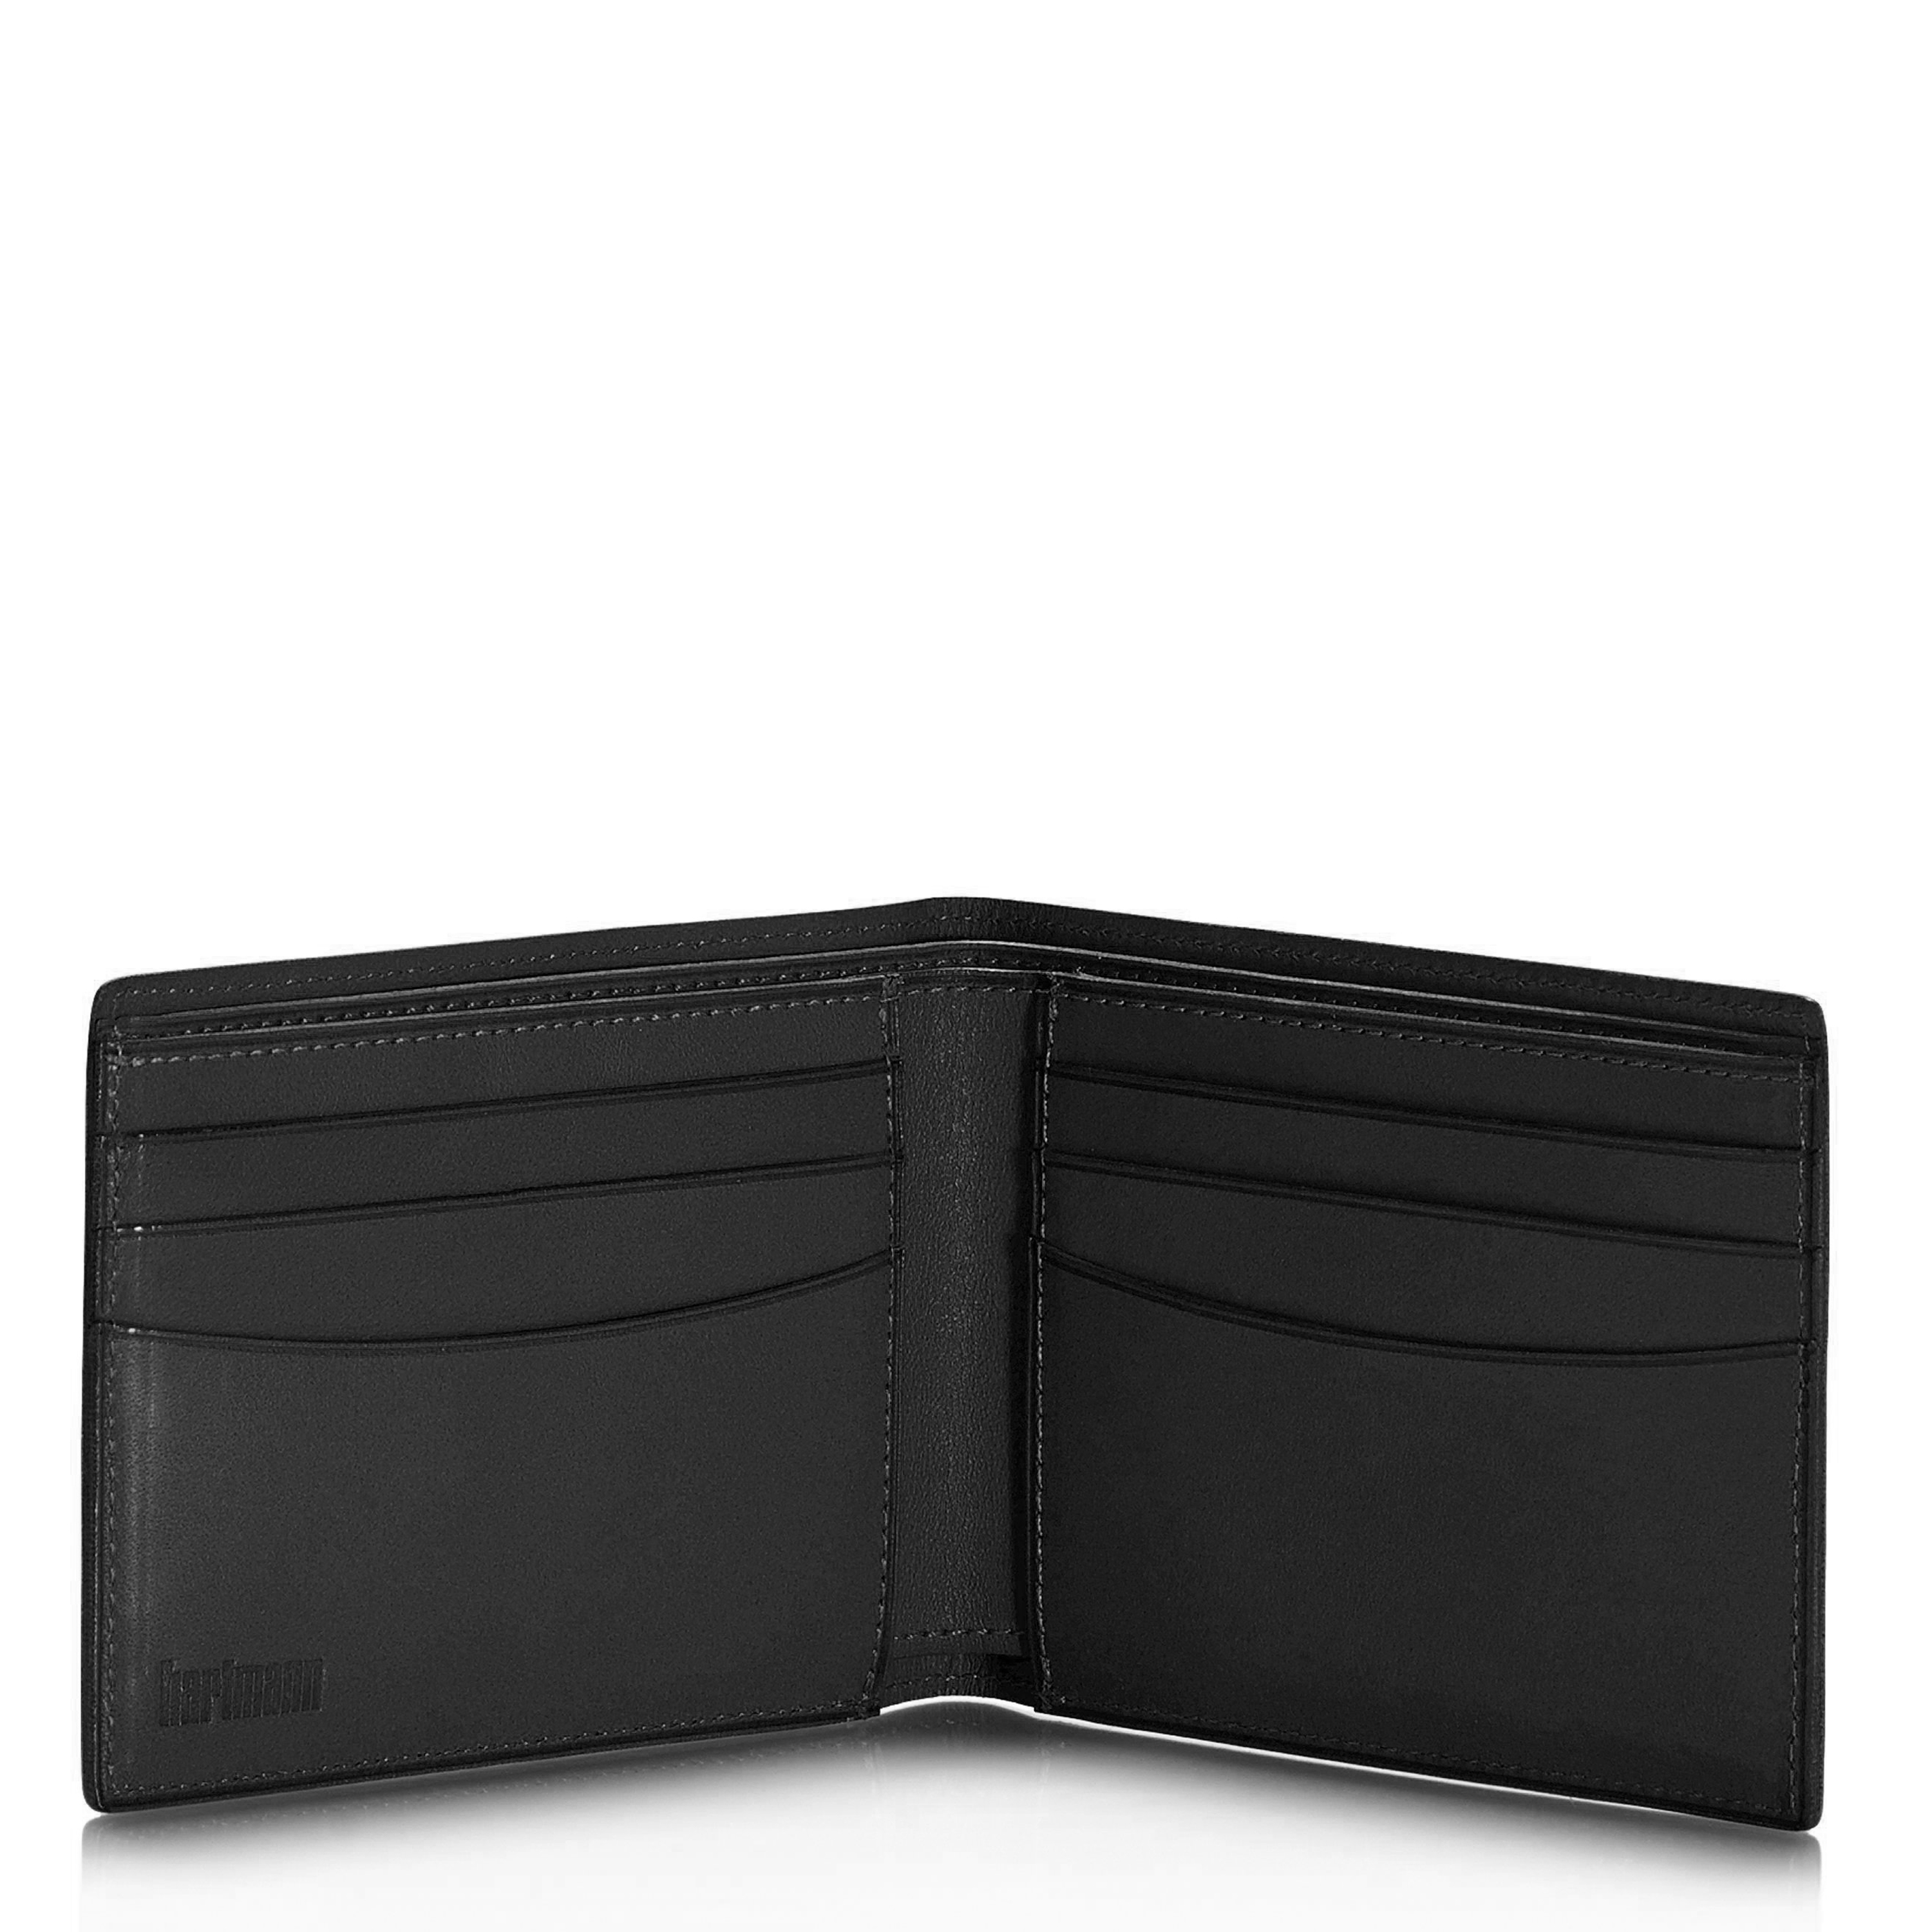 Hartmann American Belting Reserve Two Compartment Wallet